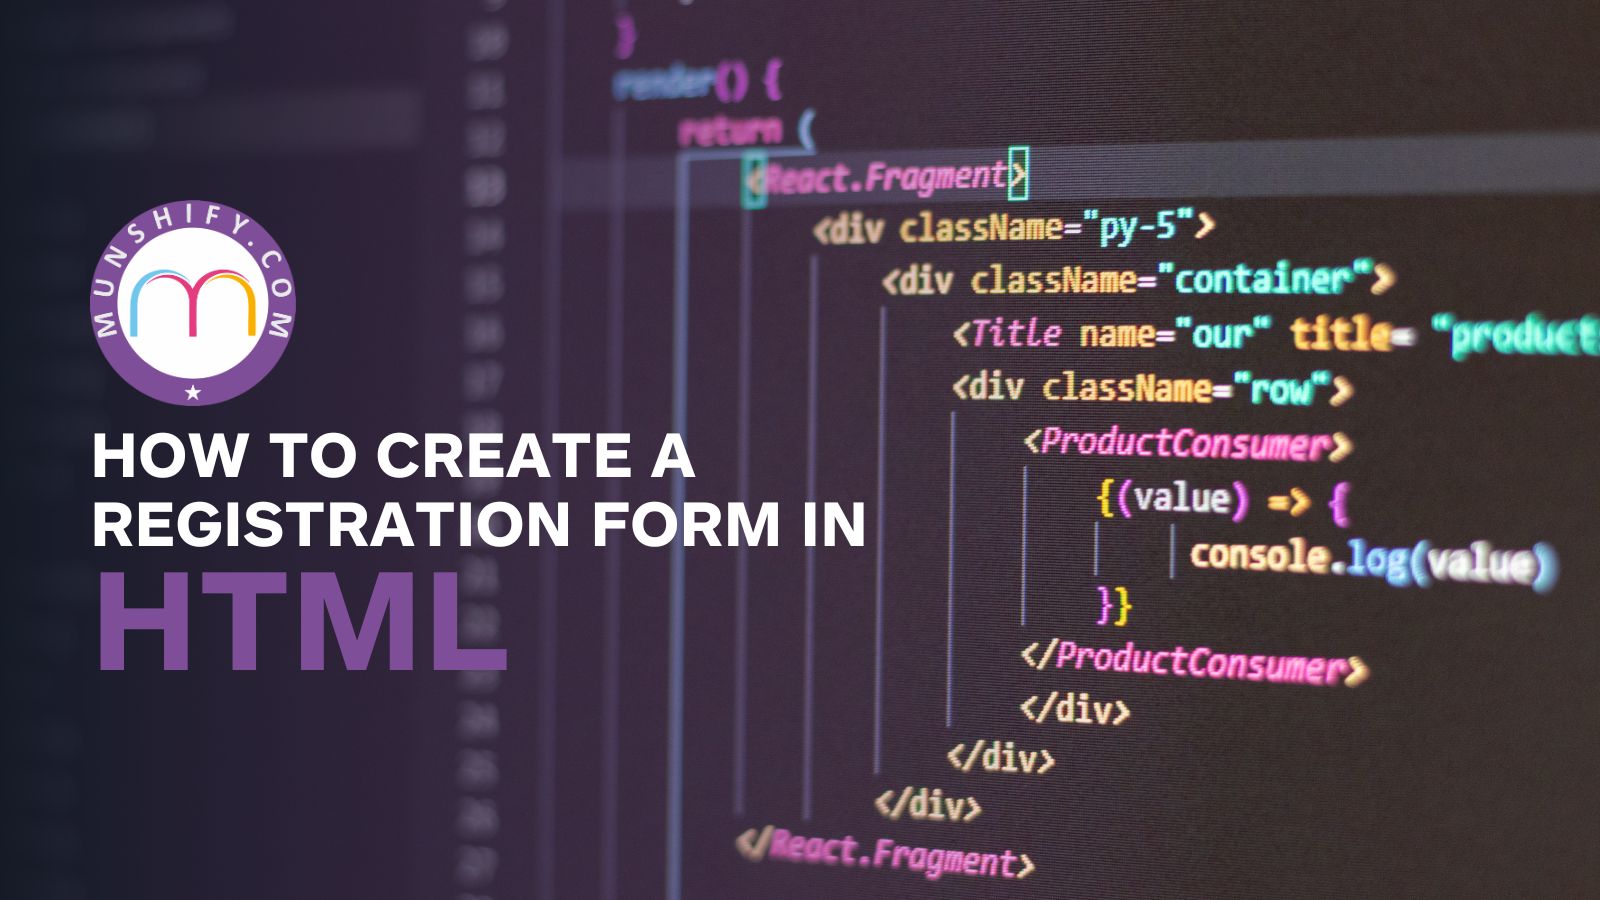 How To Create Registration Forms In HTML